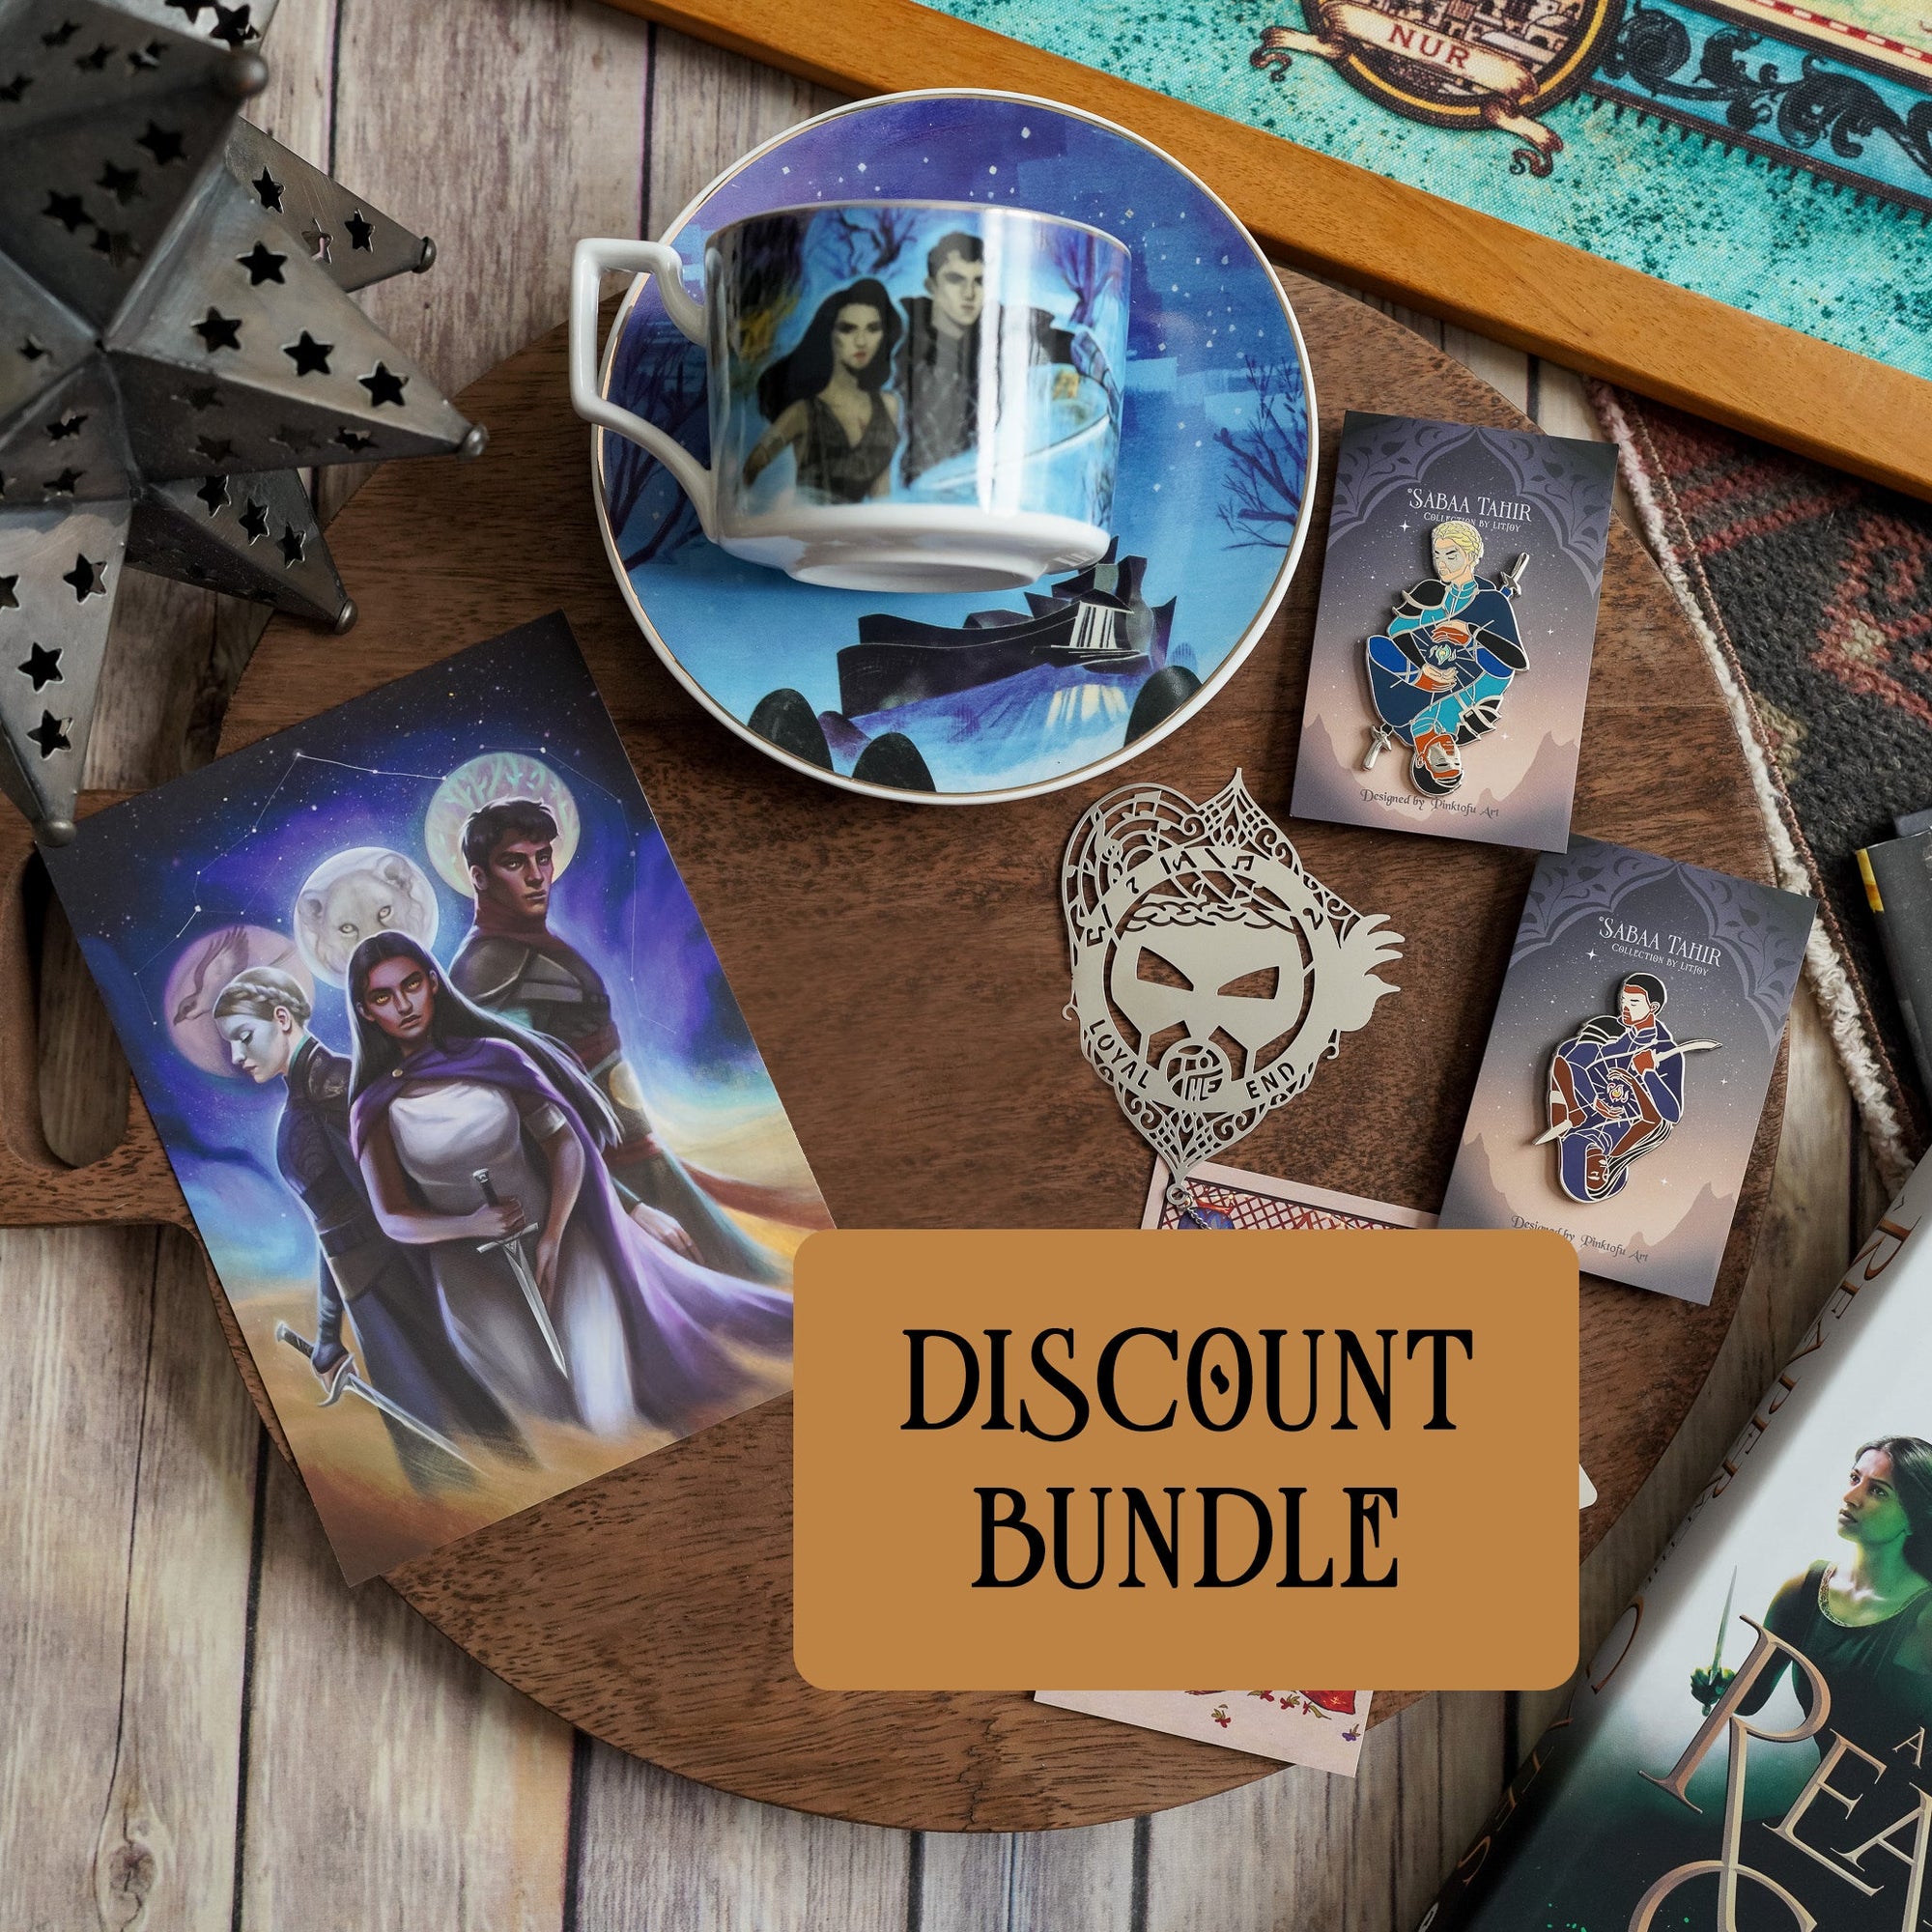 An Ember in the Ashes Discount Bundle from LitJoy Crate | Collectibles & Gifts for Booklovers